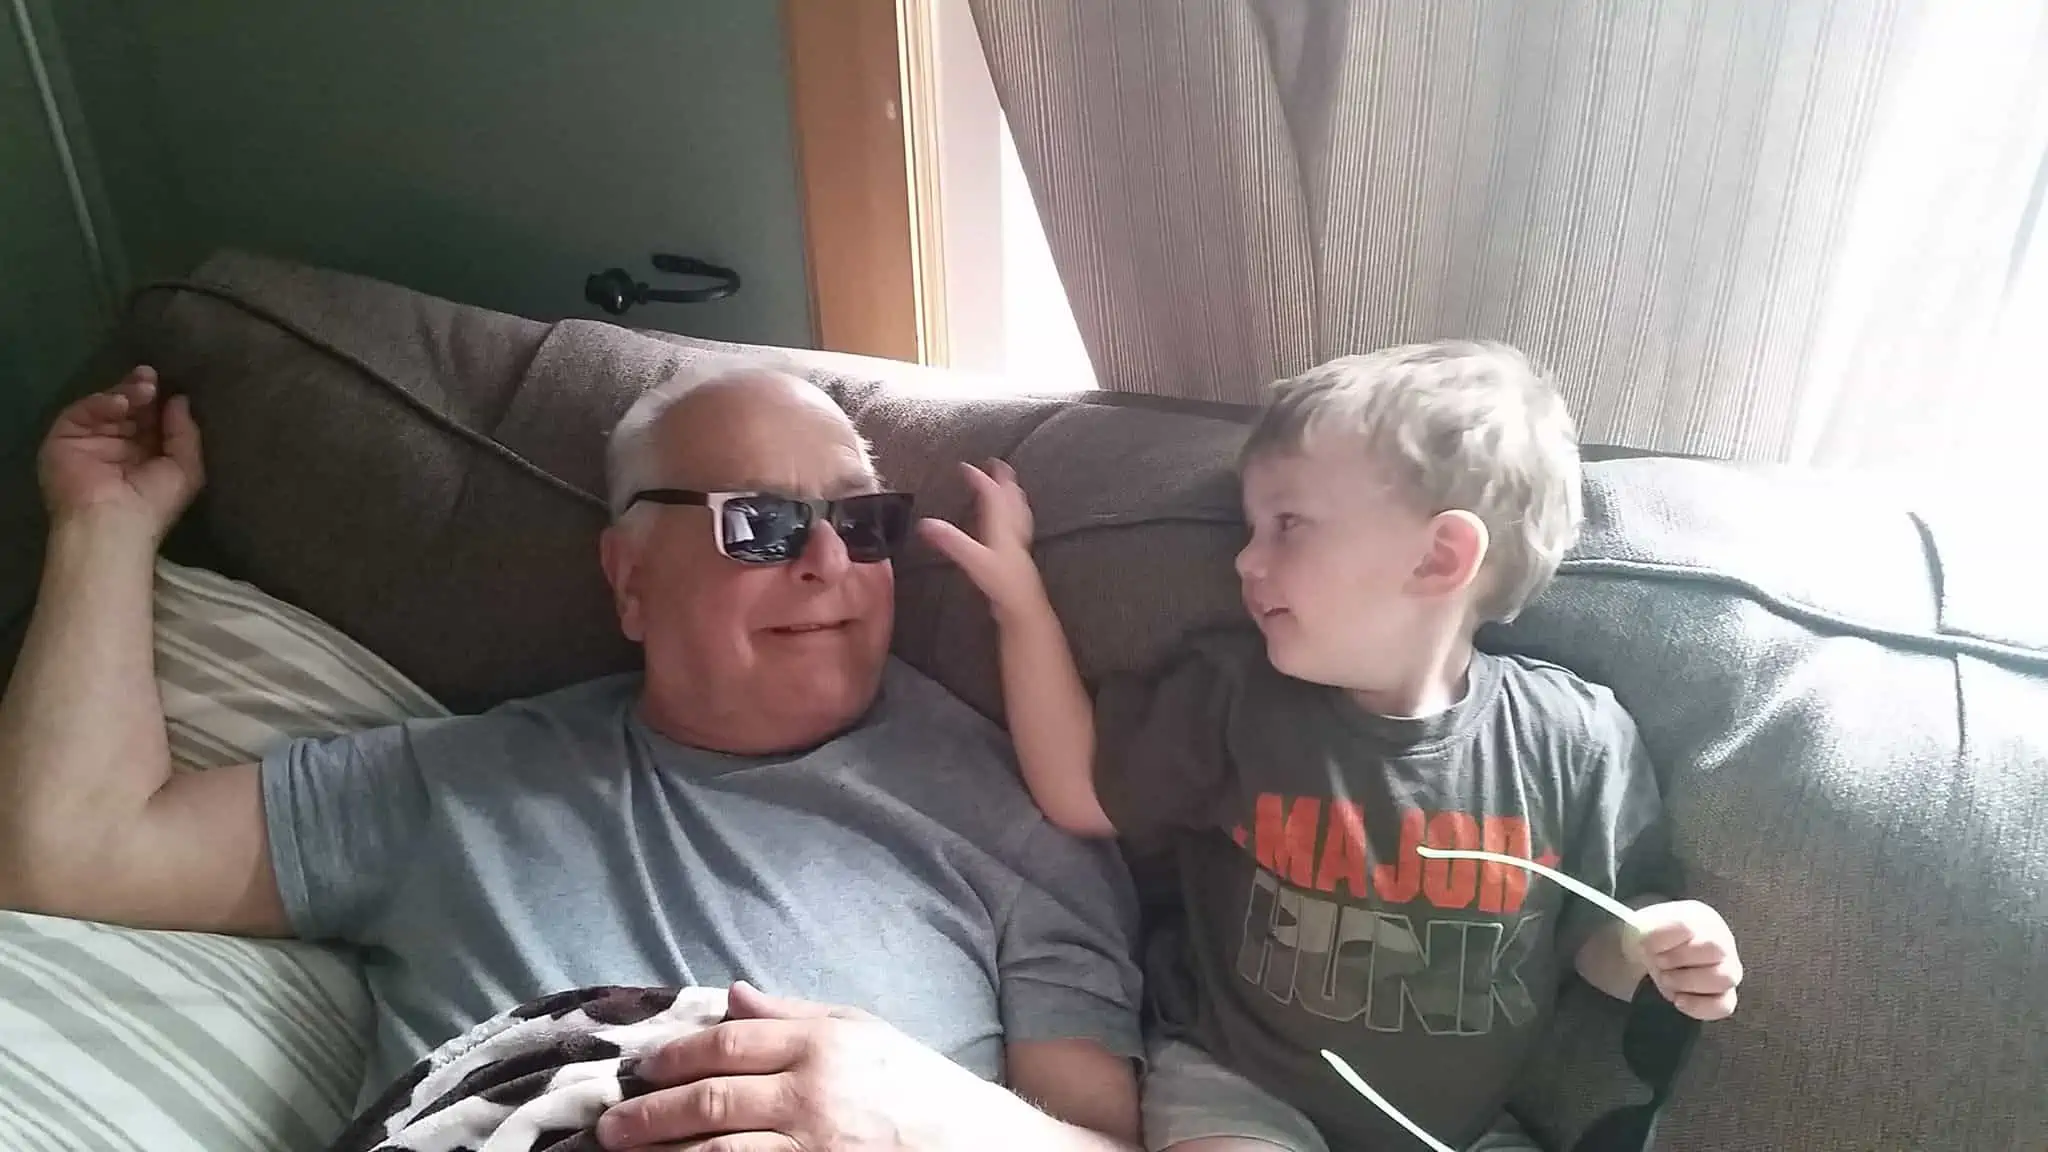 Grandpa sitting next to grandson. Both are smiling and having fun.